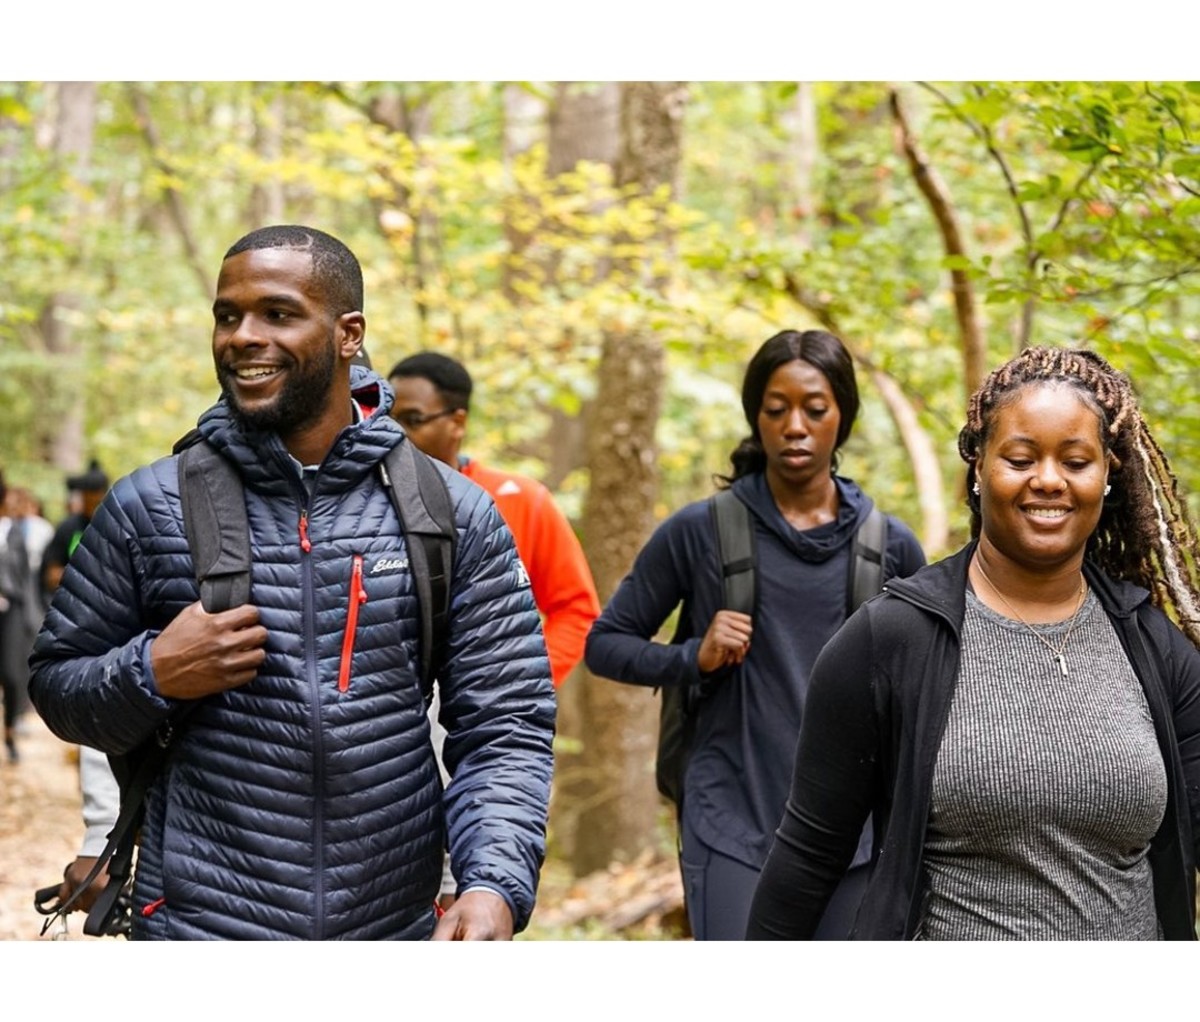 Group of Black men and women hiking through forested area